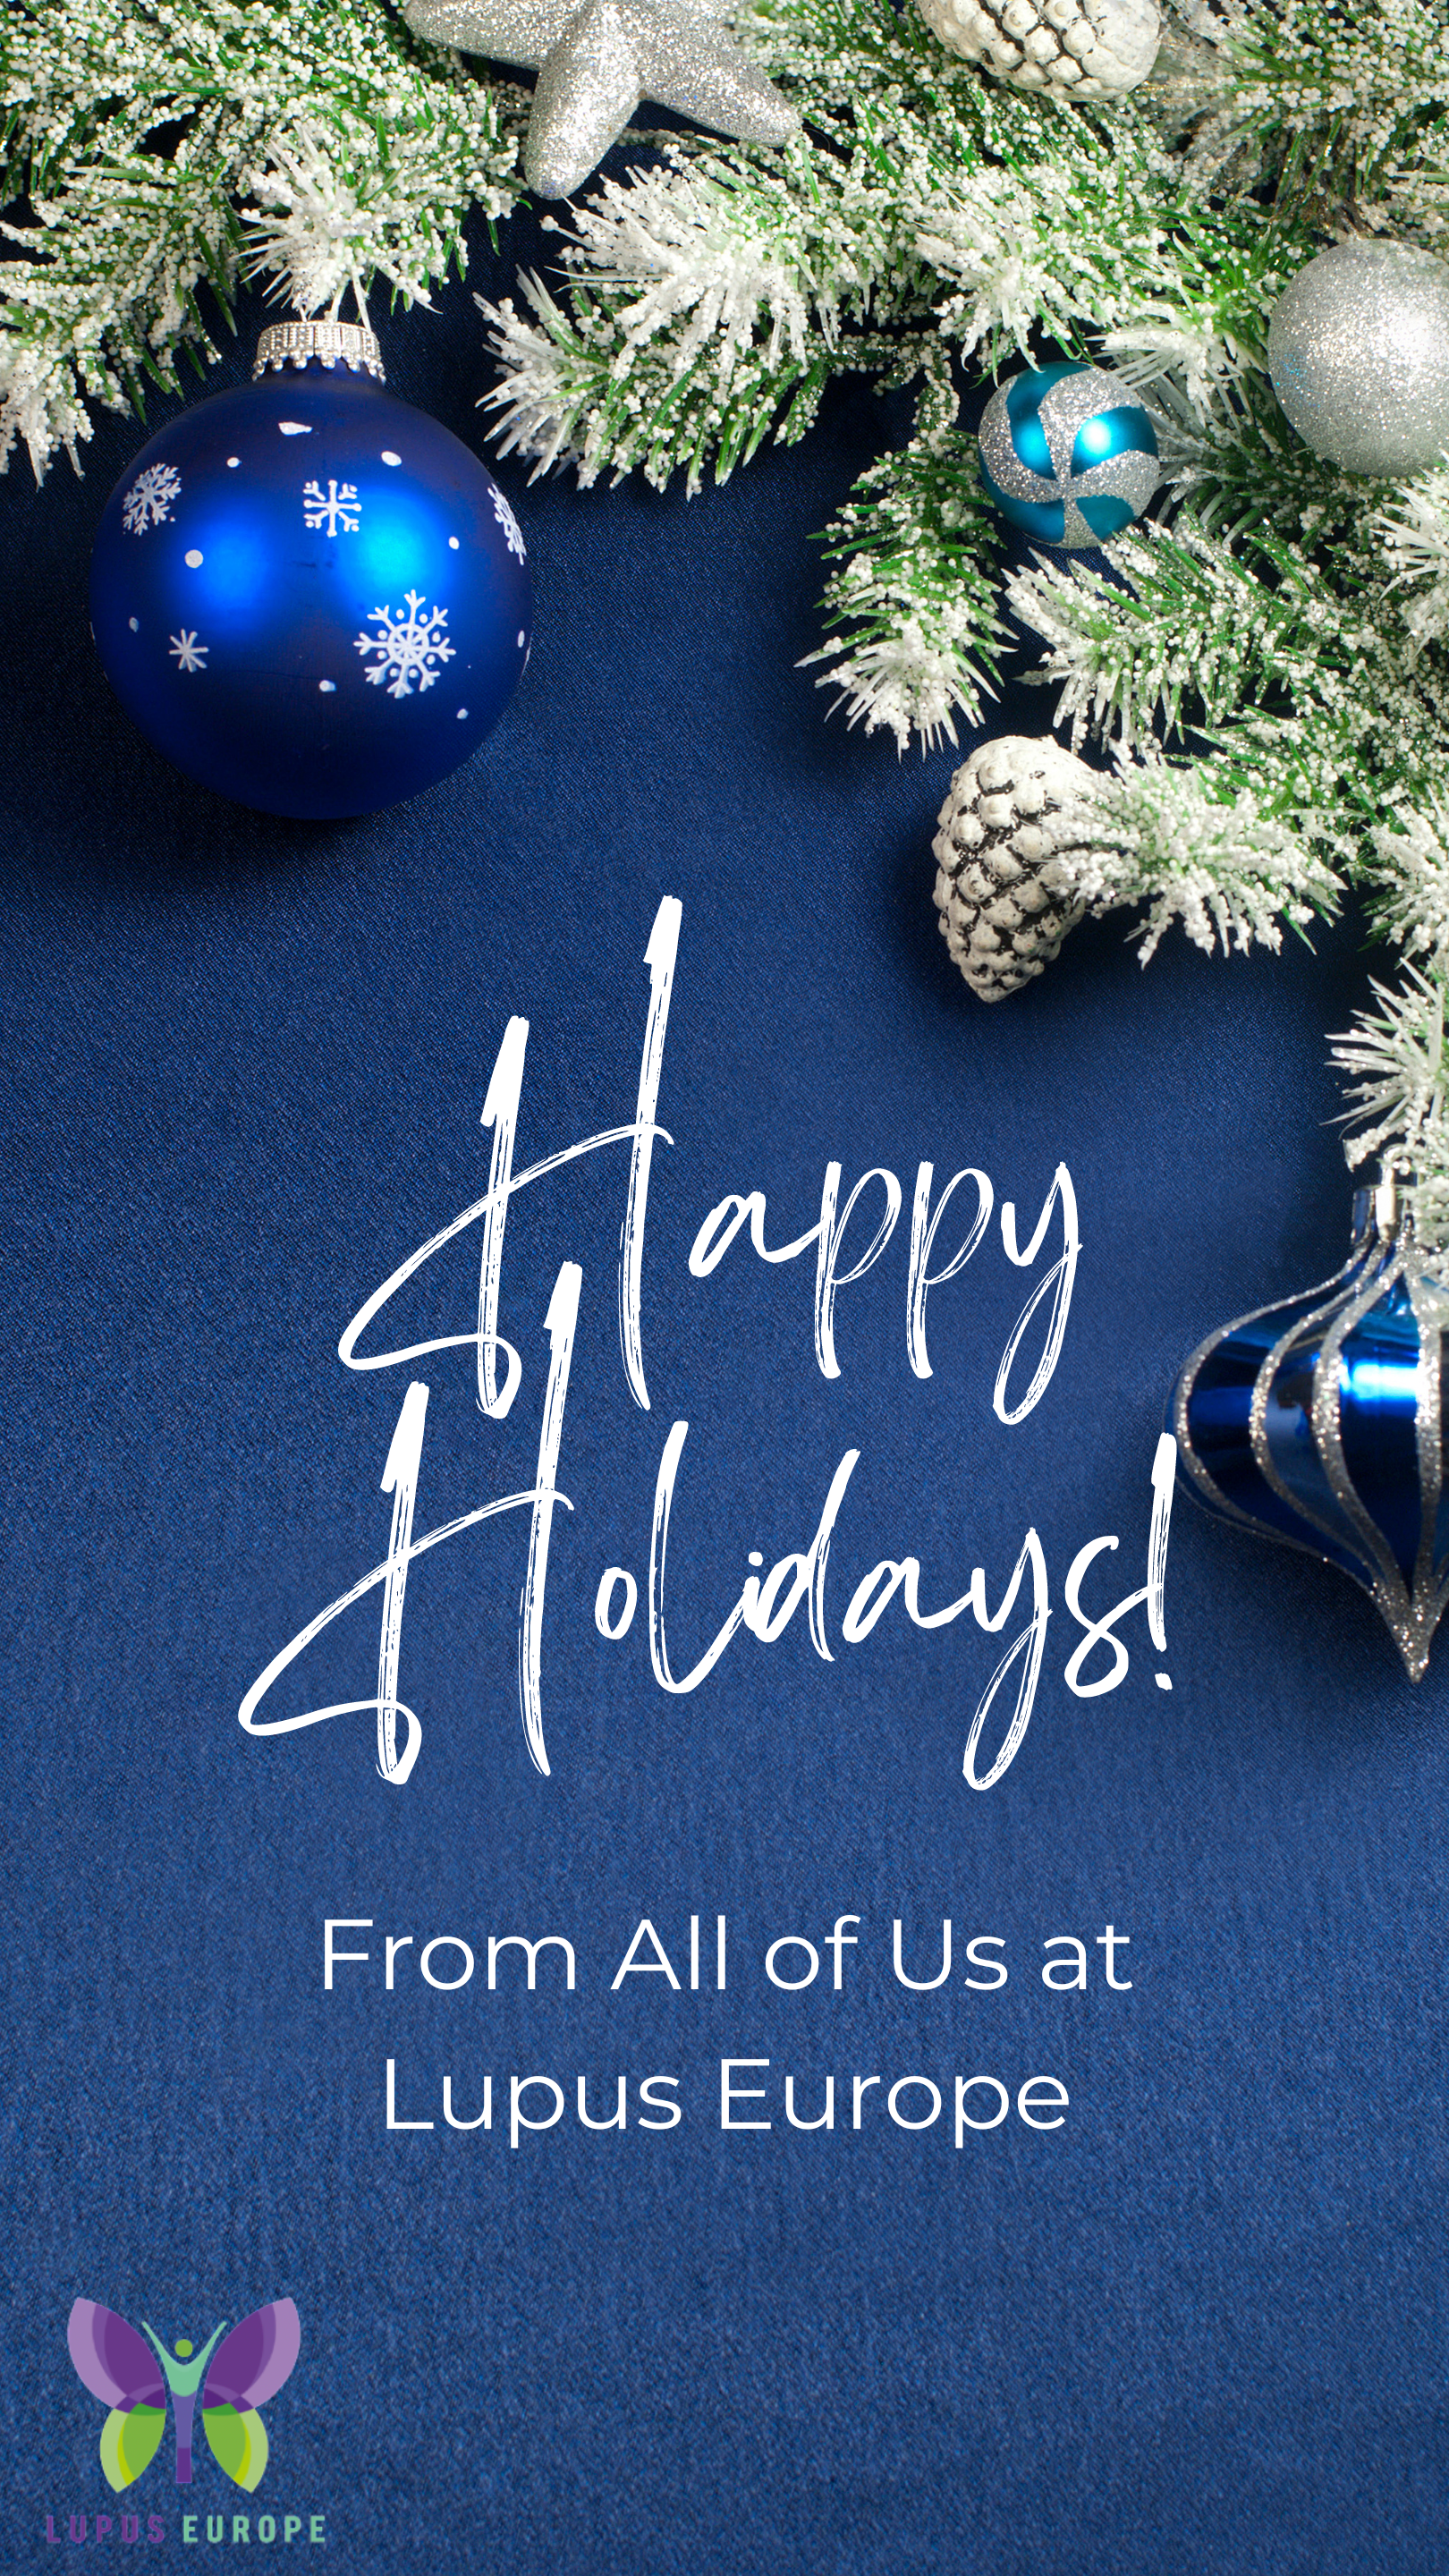 Happy Holidays greeting with a blue Christmas ornament and frosted pine branches on a navy blue background, from Lupus Europe.